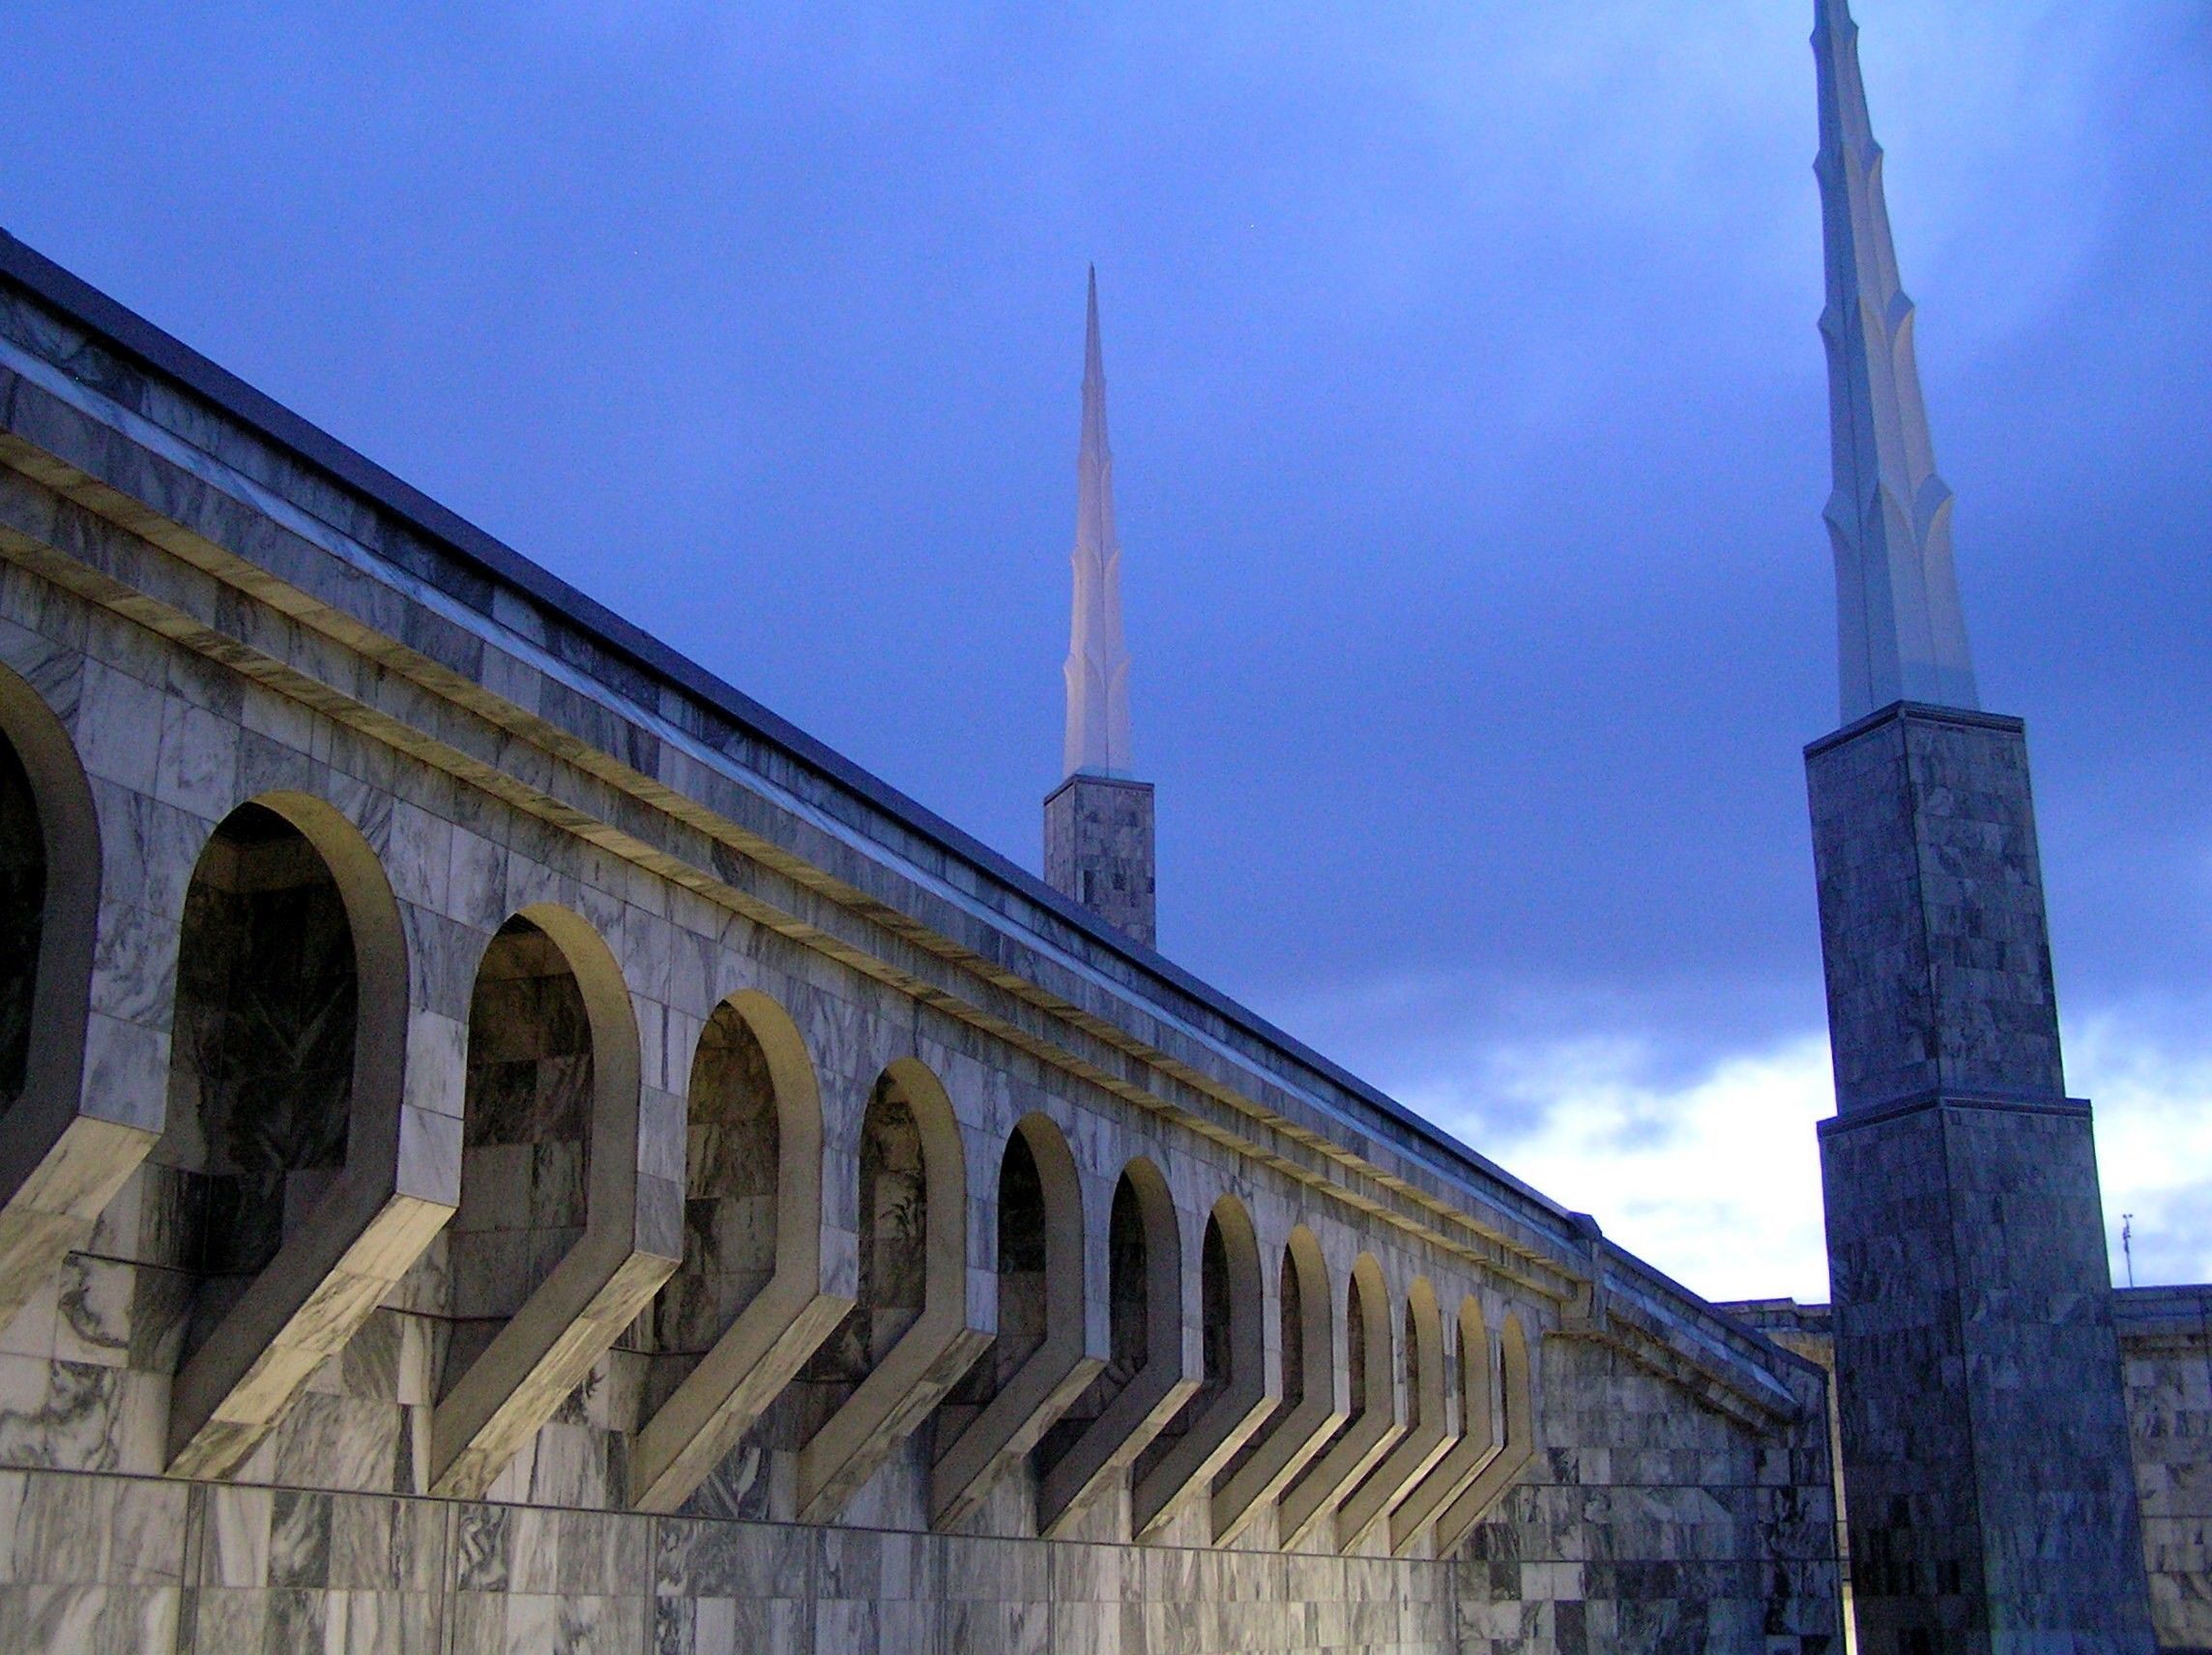 Arches line the sides of the Boise Idaho Temple.